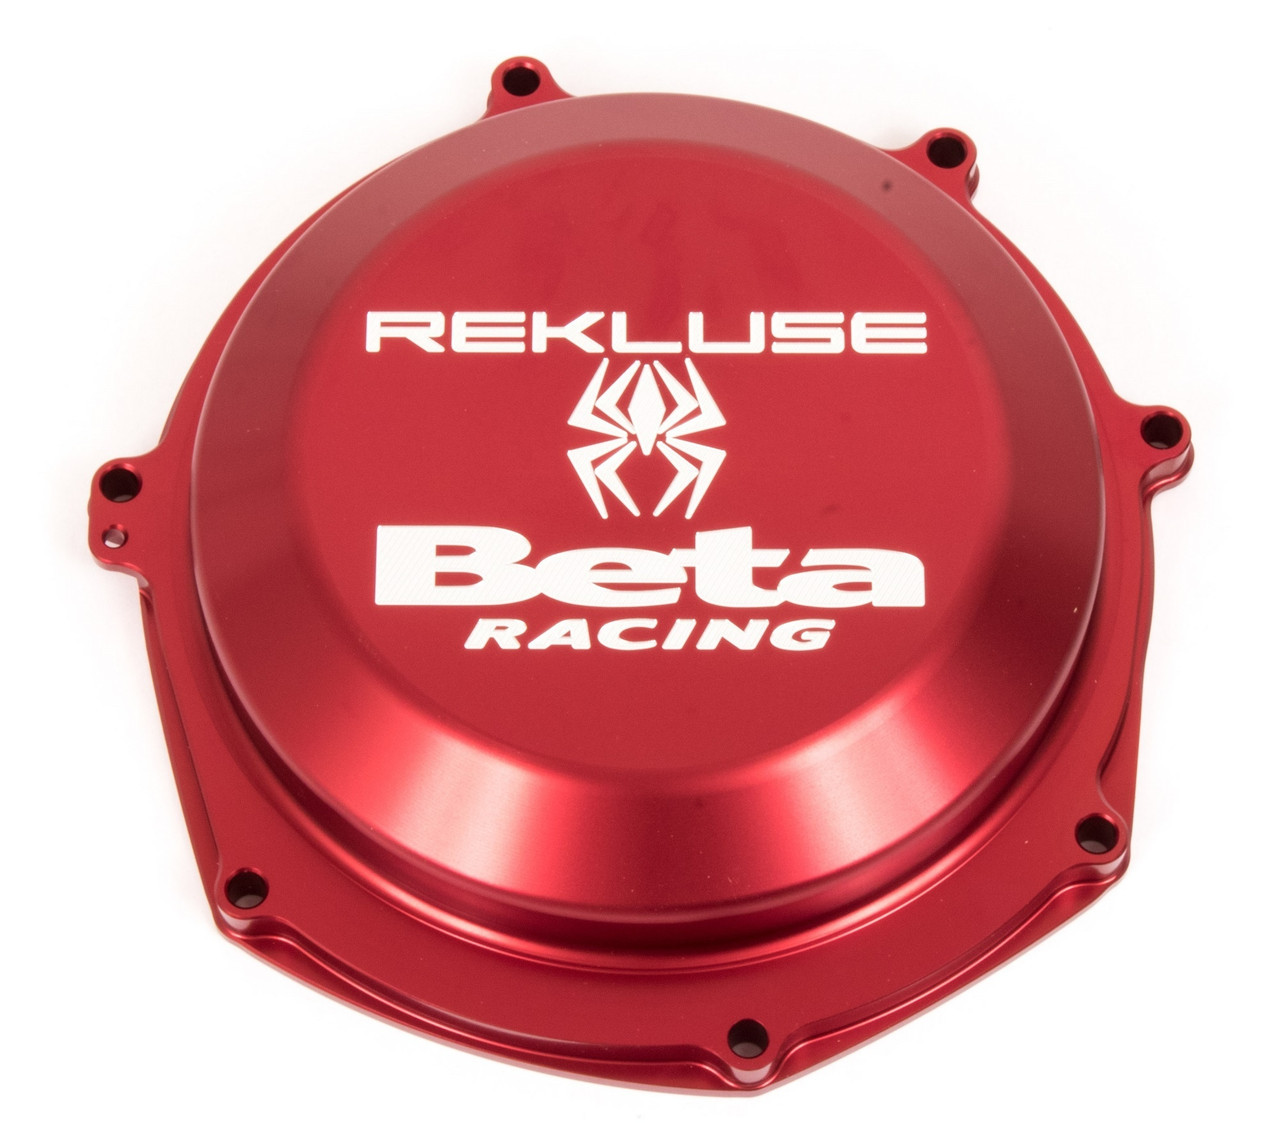 Billet Clutch Cover by Rekluse 4-Stroke, 2018/19 Billet aluminum red aluminum clutch cover Thicker and stronger than stock cover Beta Racing and Rekluse machined onto the cover Works with both stock and Rekluse clutches